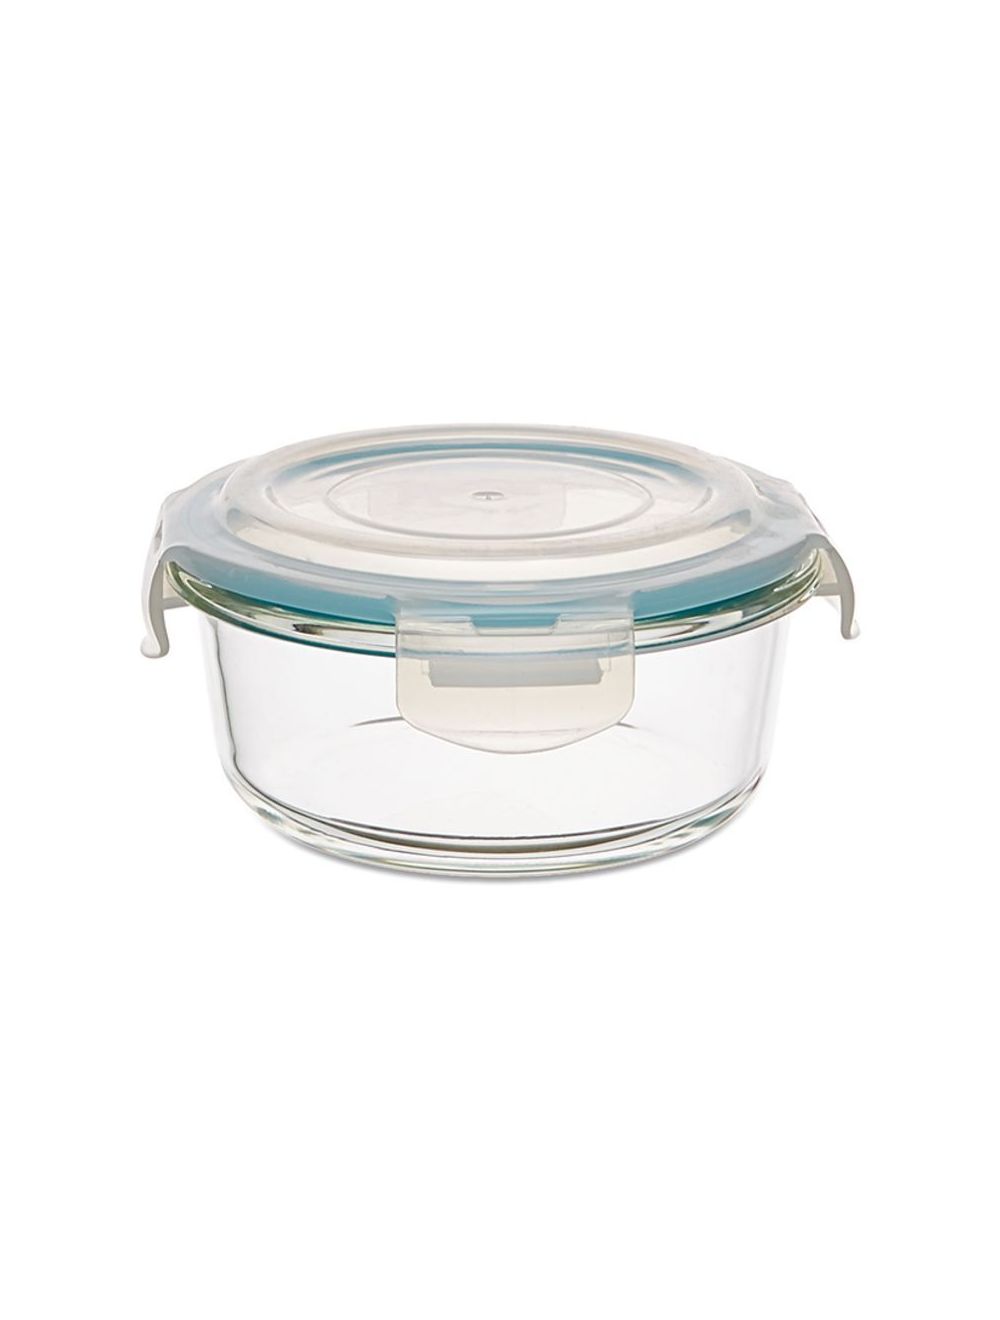 Neoflam Cloc 0.62 Litre Glass Storage - Clear